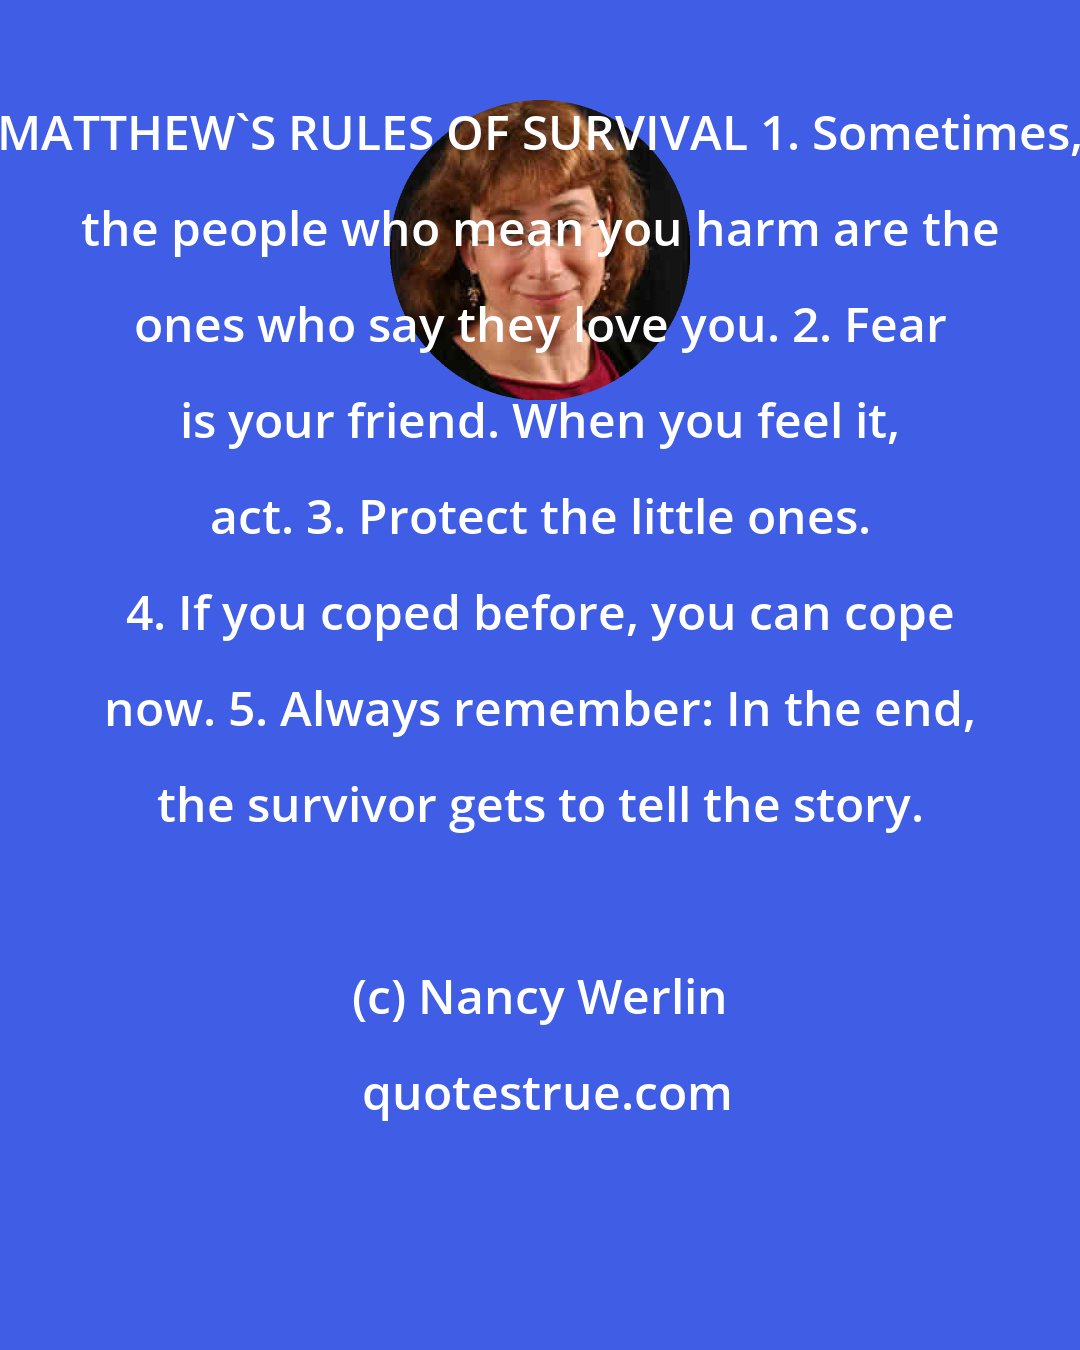 Nancy Werlin: MATTHEW'S RULES OF SURVIVAL 1. Sometimes, the people who mean you harm are the ones who say they love you. 2. Fear is your friend. When you feel it, act. 3. Protect the little ones. 4. If you coped before, you can cope now. 5. Always remember: In the end, the survivor gets to tell the story.